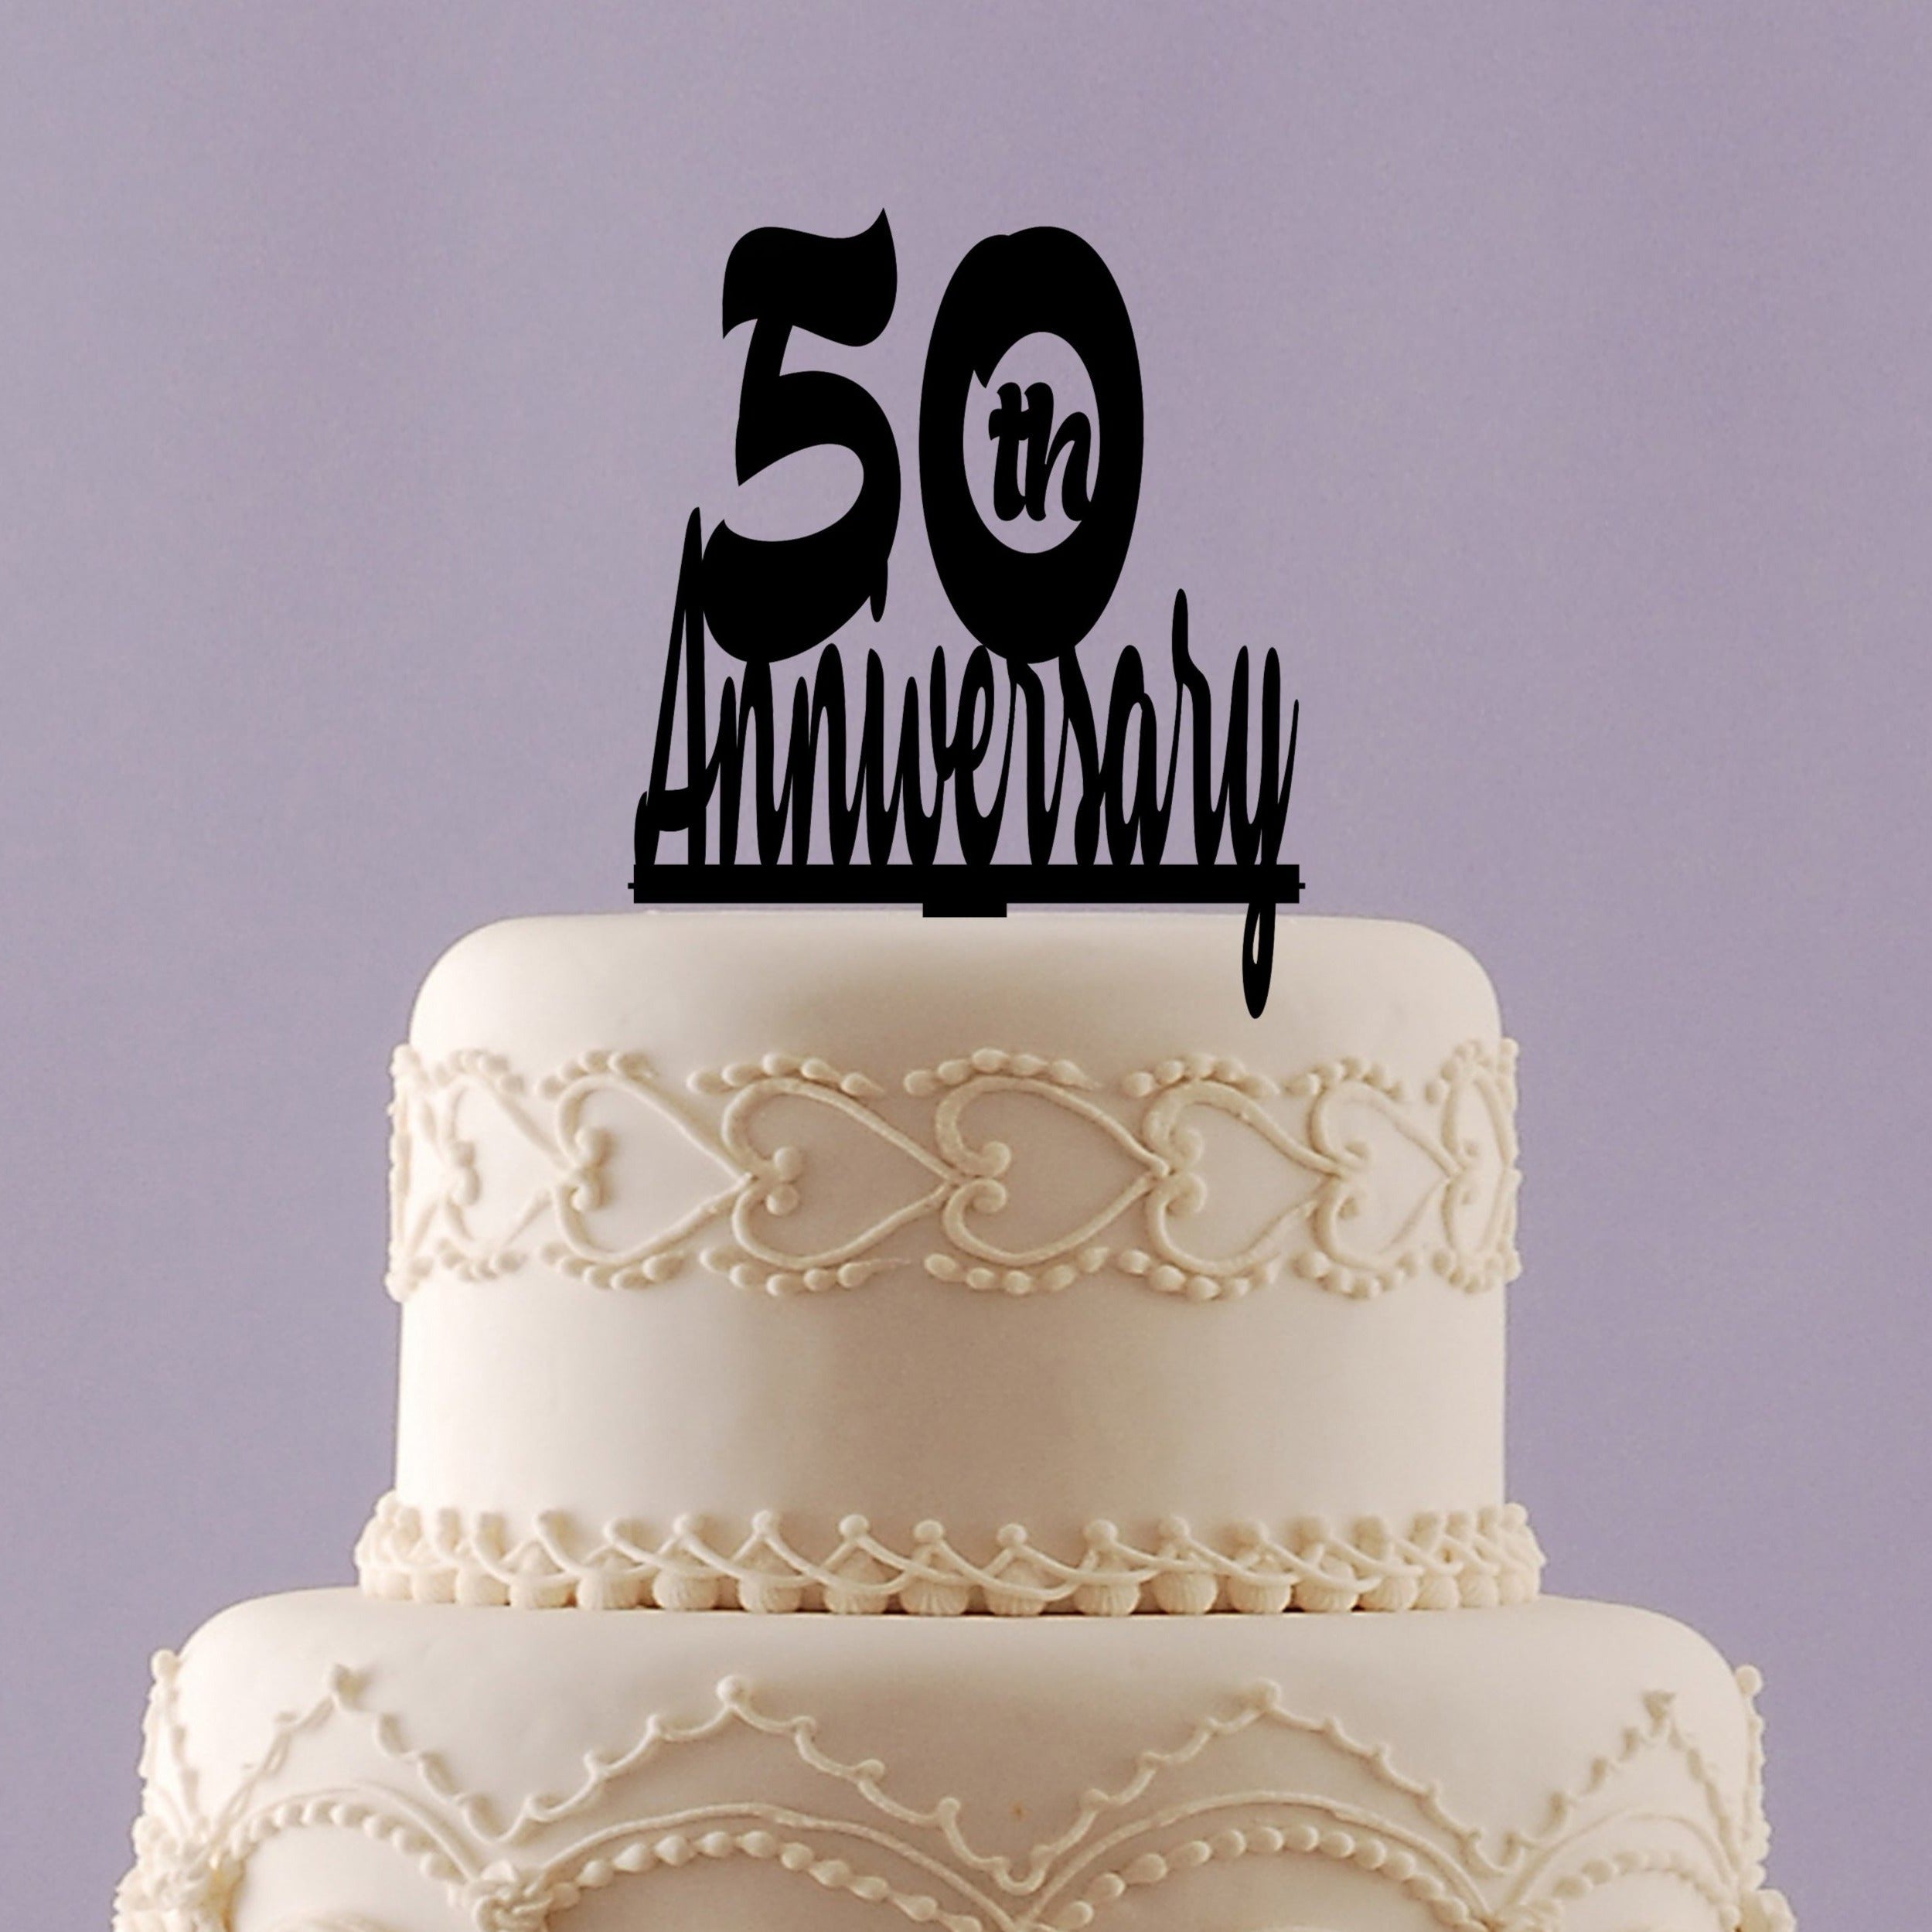 50th Wedding Anniversary Acrylic Cake Topper - Favors & Flowers